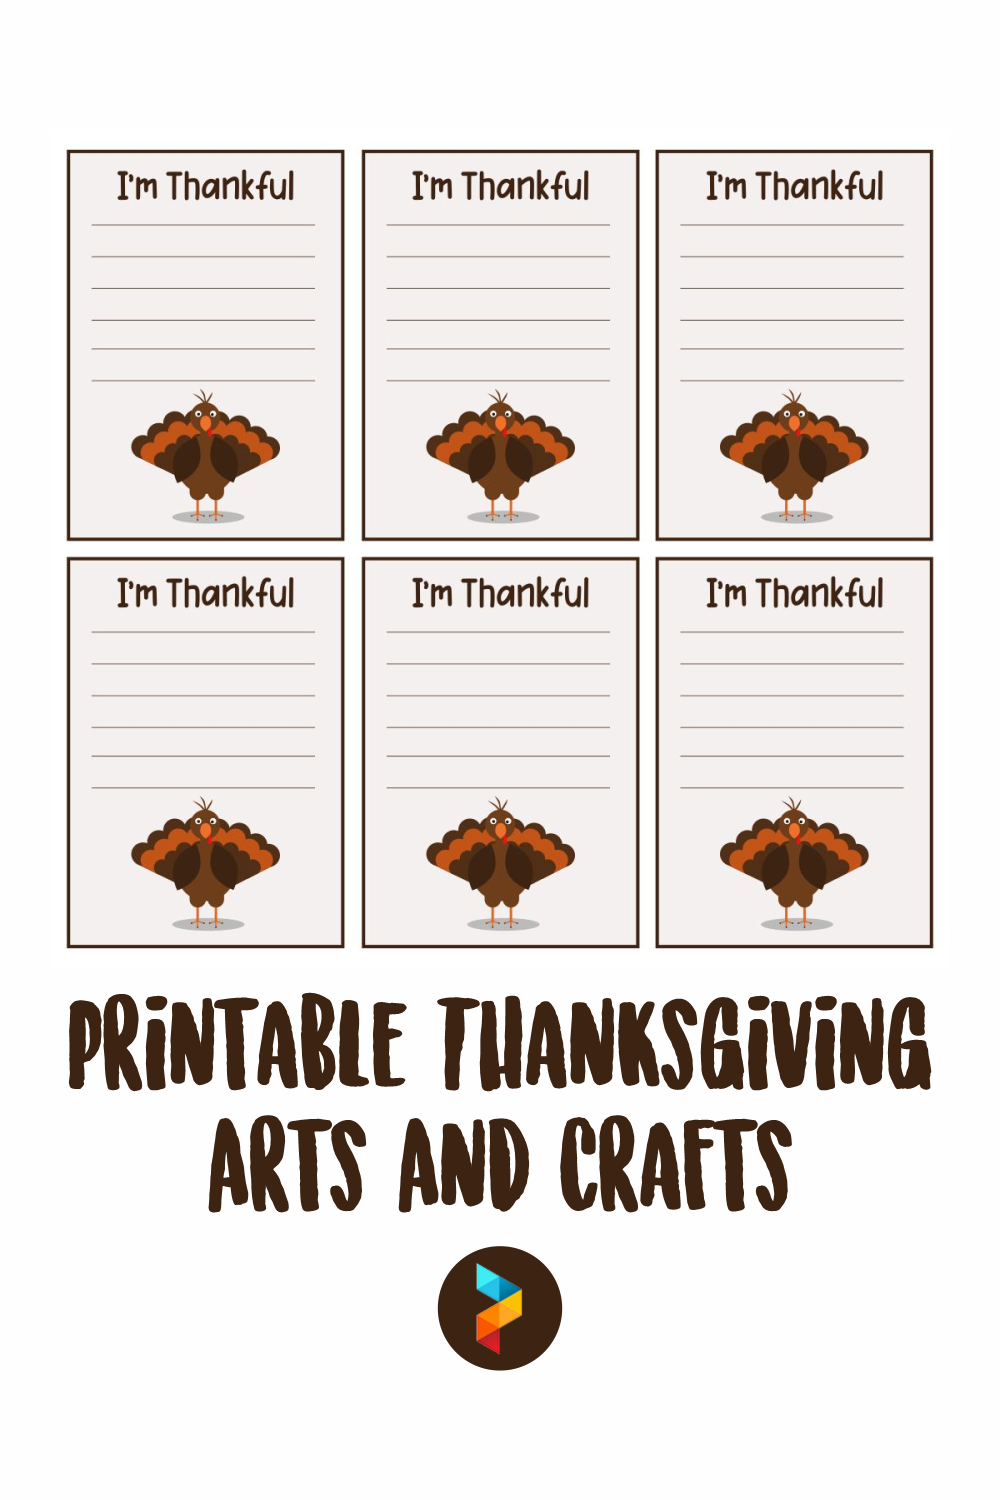 Printable Thanksgiving Arts And Crafts